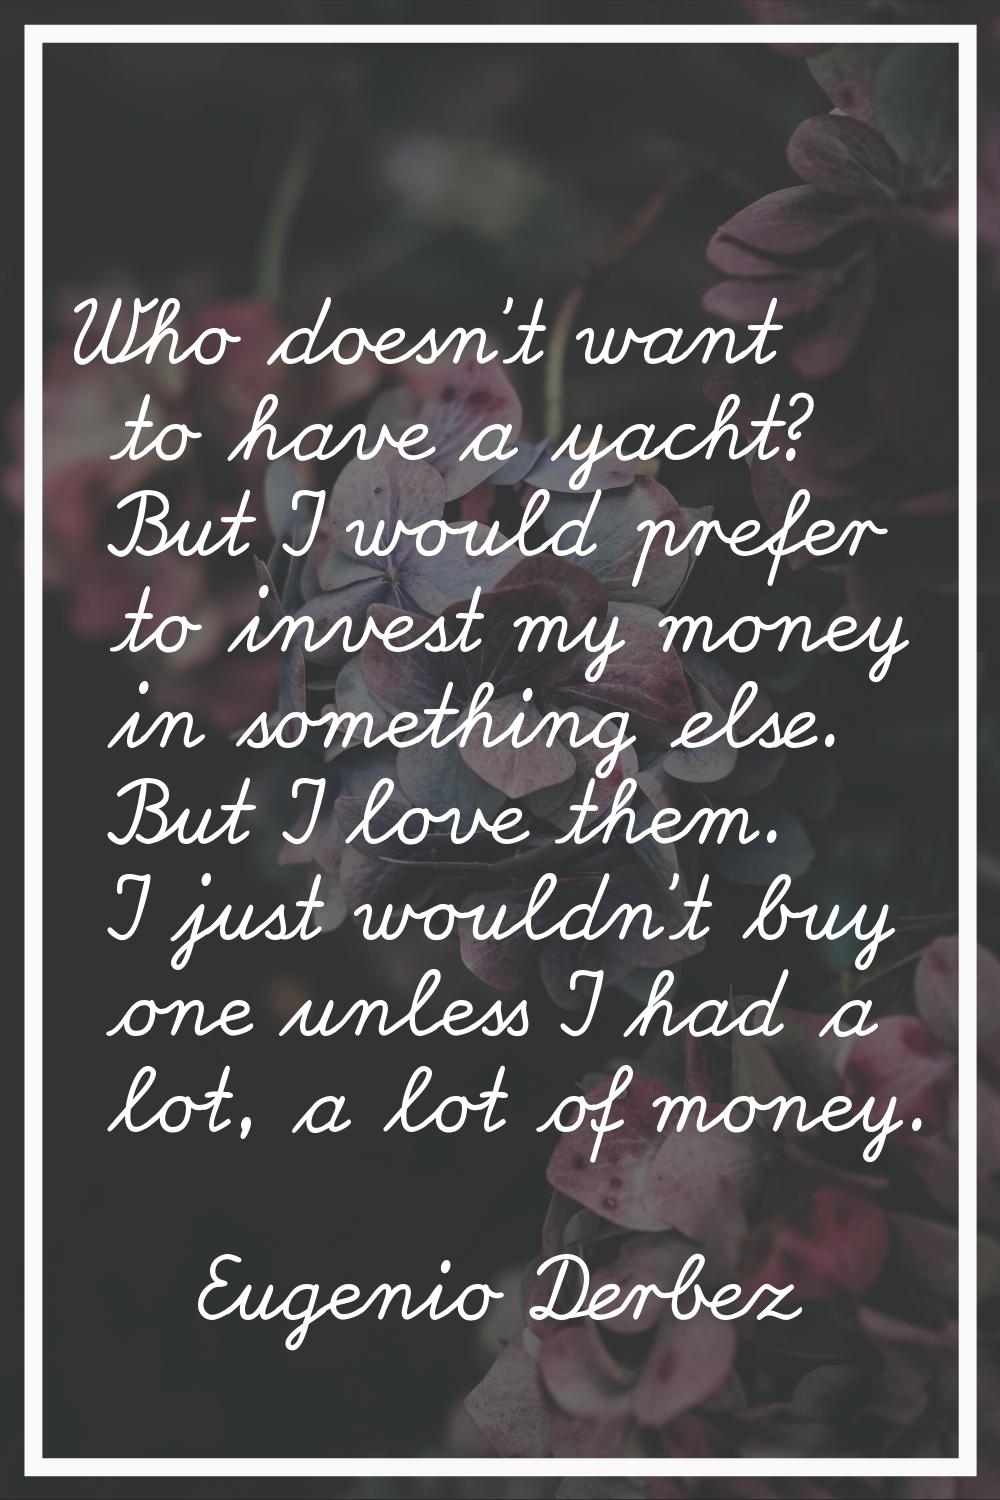 Who doesn't want to have a yacht? But I would prefer to invest my money in something else. But I lo